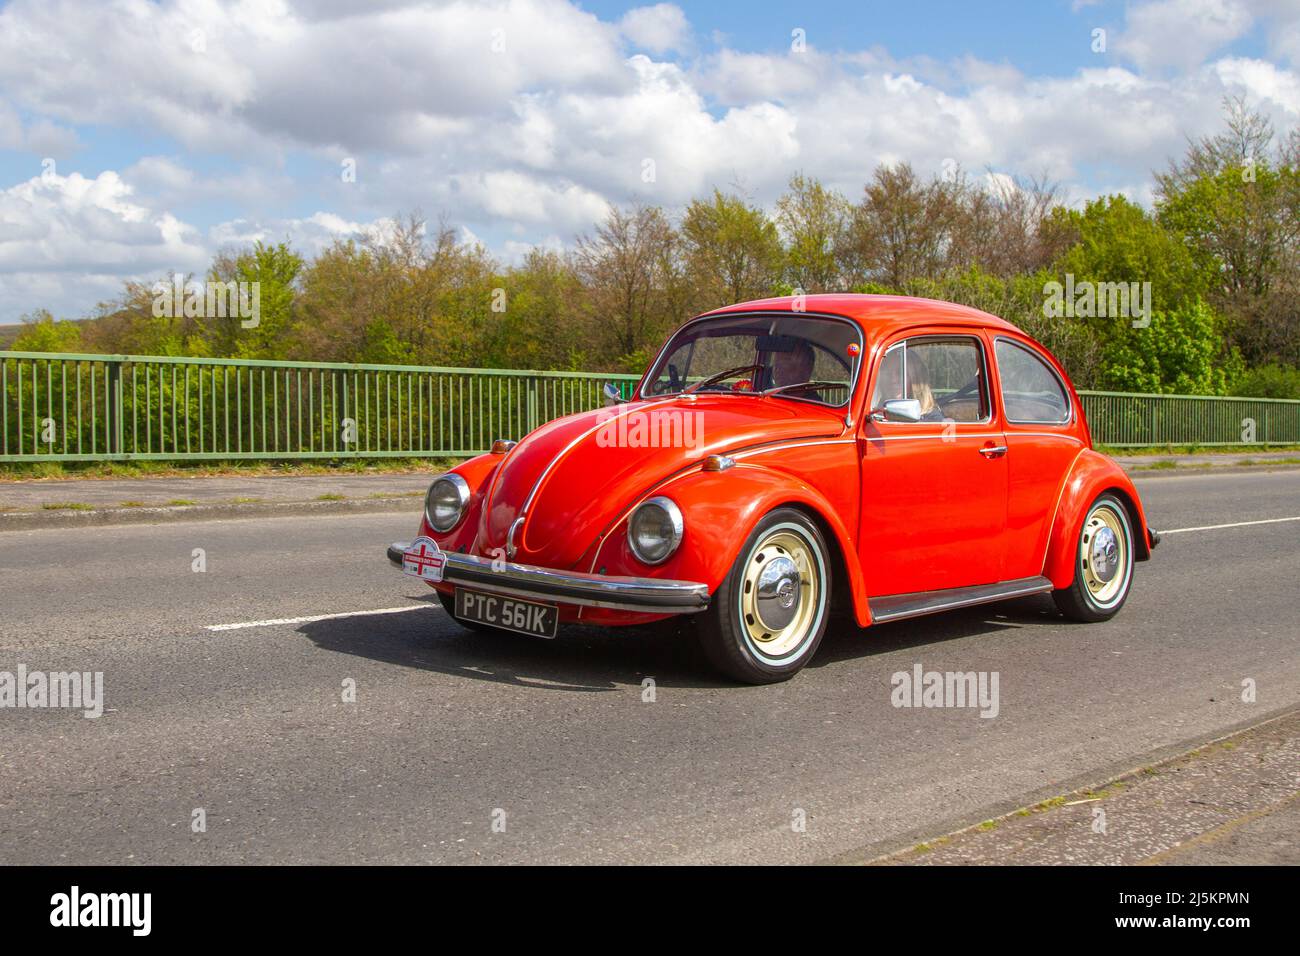 1972 70s seventies red VW Volkswagen Beetle 1285cc petrol Vee Dub; VW Beetles, old type, bug, Volkswagen Type 1, two-door, rear-engine subcompact economy car, Käfer, Vocho, Fusca, Cocinelle, Maggiolino, Punch Buggy, People’s Car, air-cooled, rear-engined, rear-wheel-drive compact car VW Beetles, old type bug driving near Manchester, UK Stock Photo